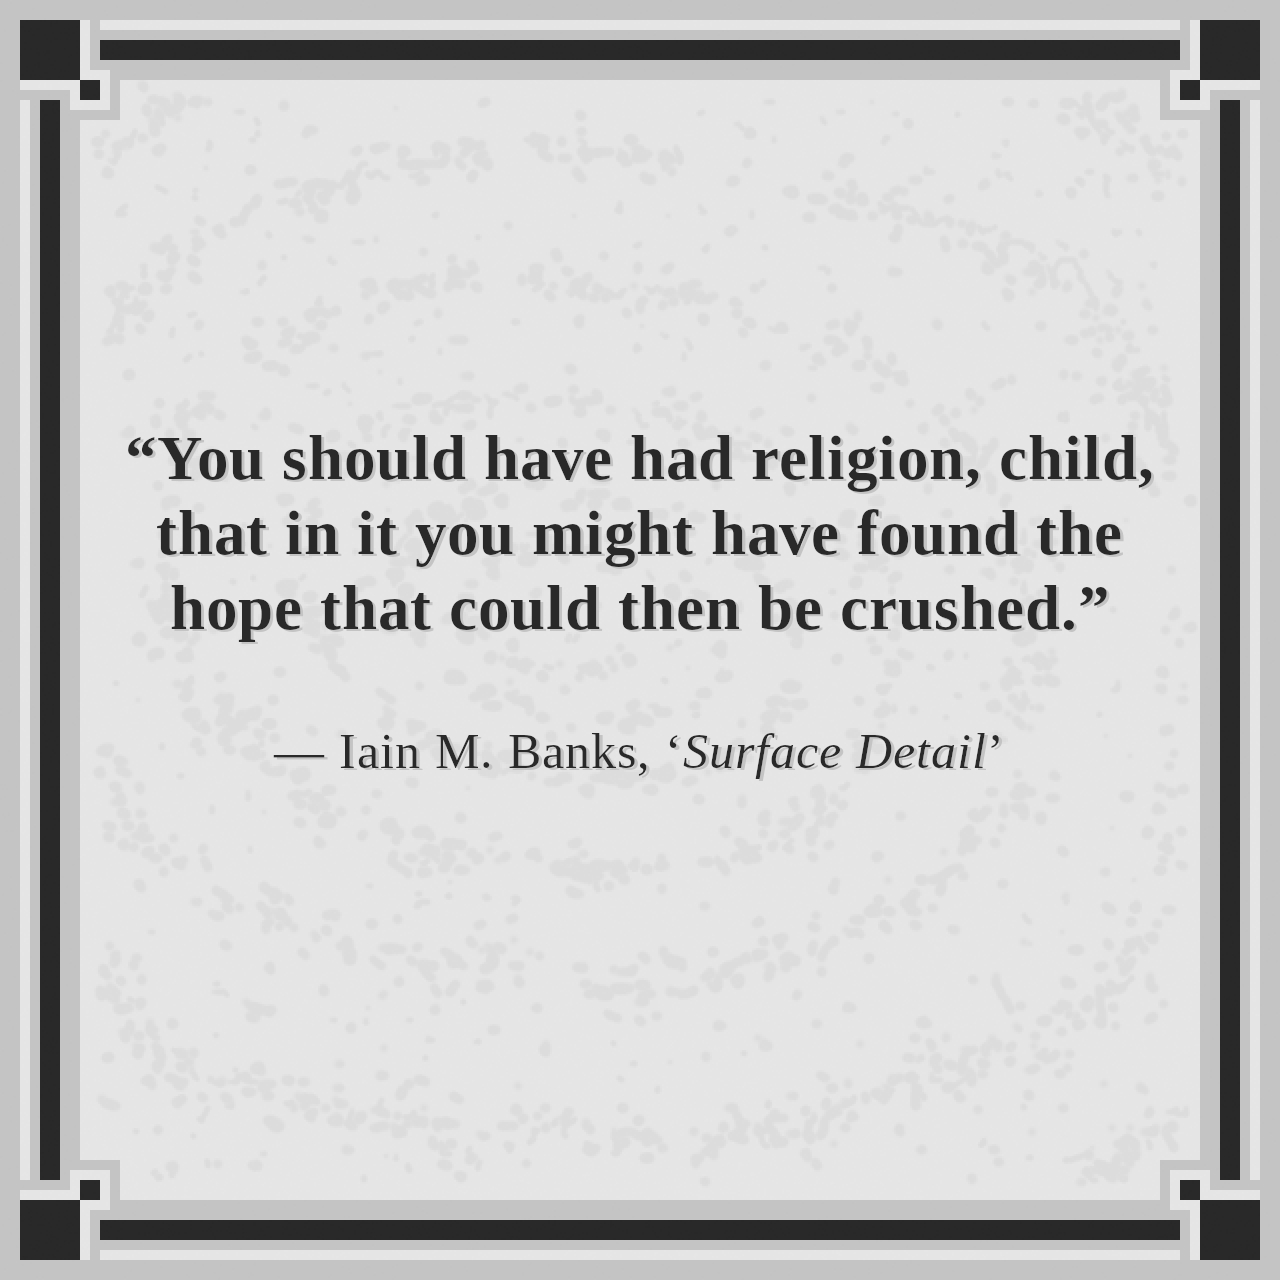 “You should have had religion, child, that in it you might have found the hope that could then be crushed.”

— Iain M. Banks, ‘Surface Detail’